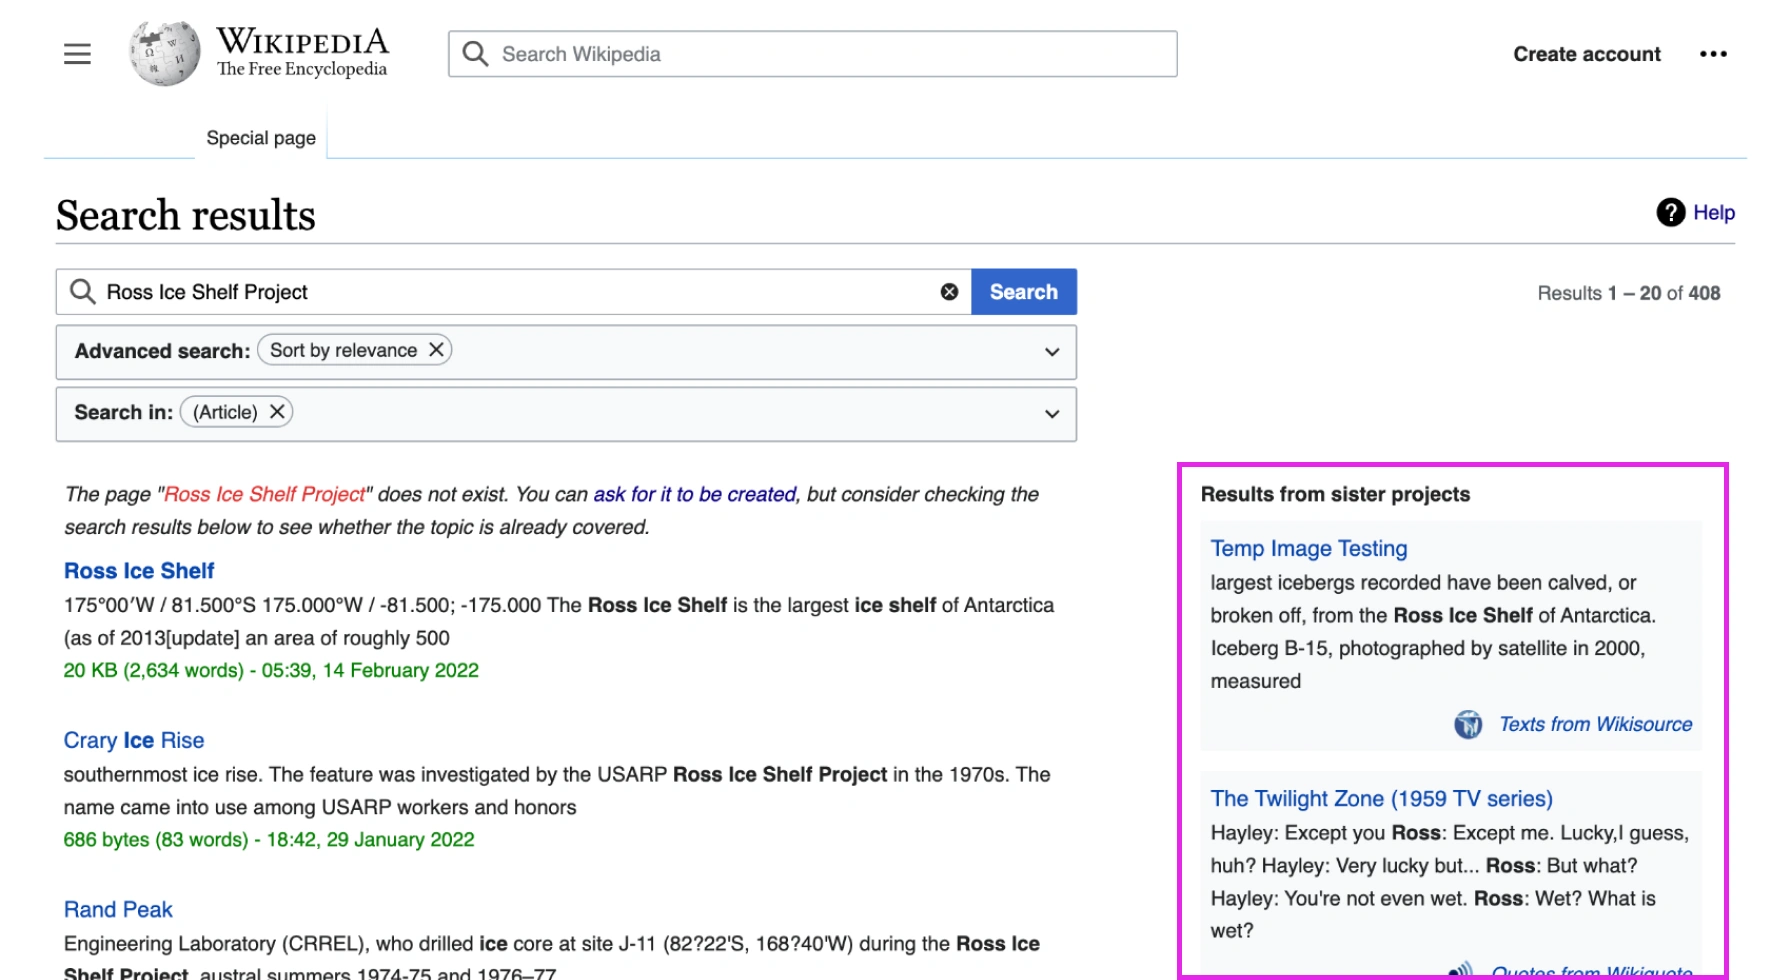 Screenshot of Wikipedia highlighting search results in sister projects